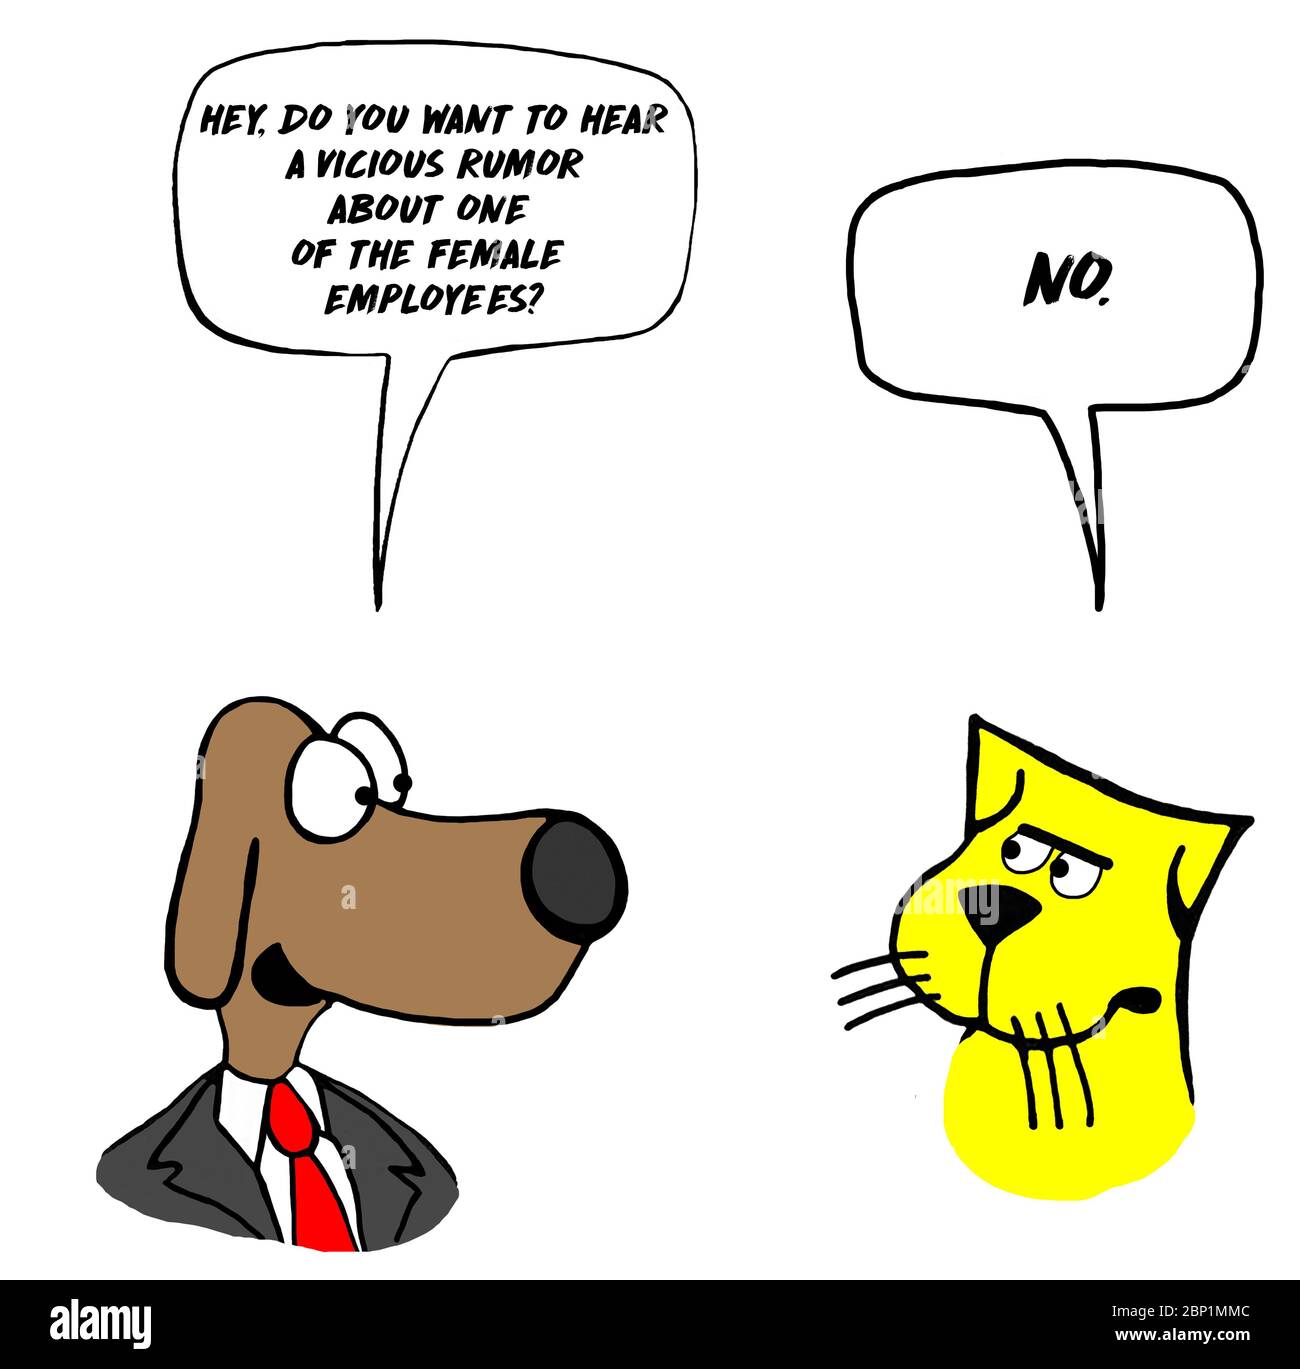 Color cartoon showing a male dog business man wanting to gossip and share a vicious rumor about one of the female employees. Stock Photo